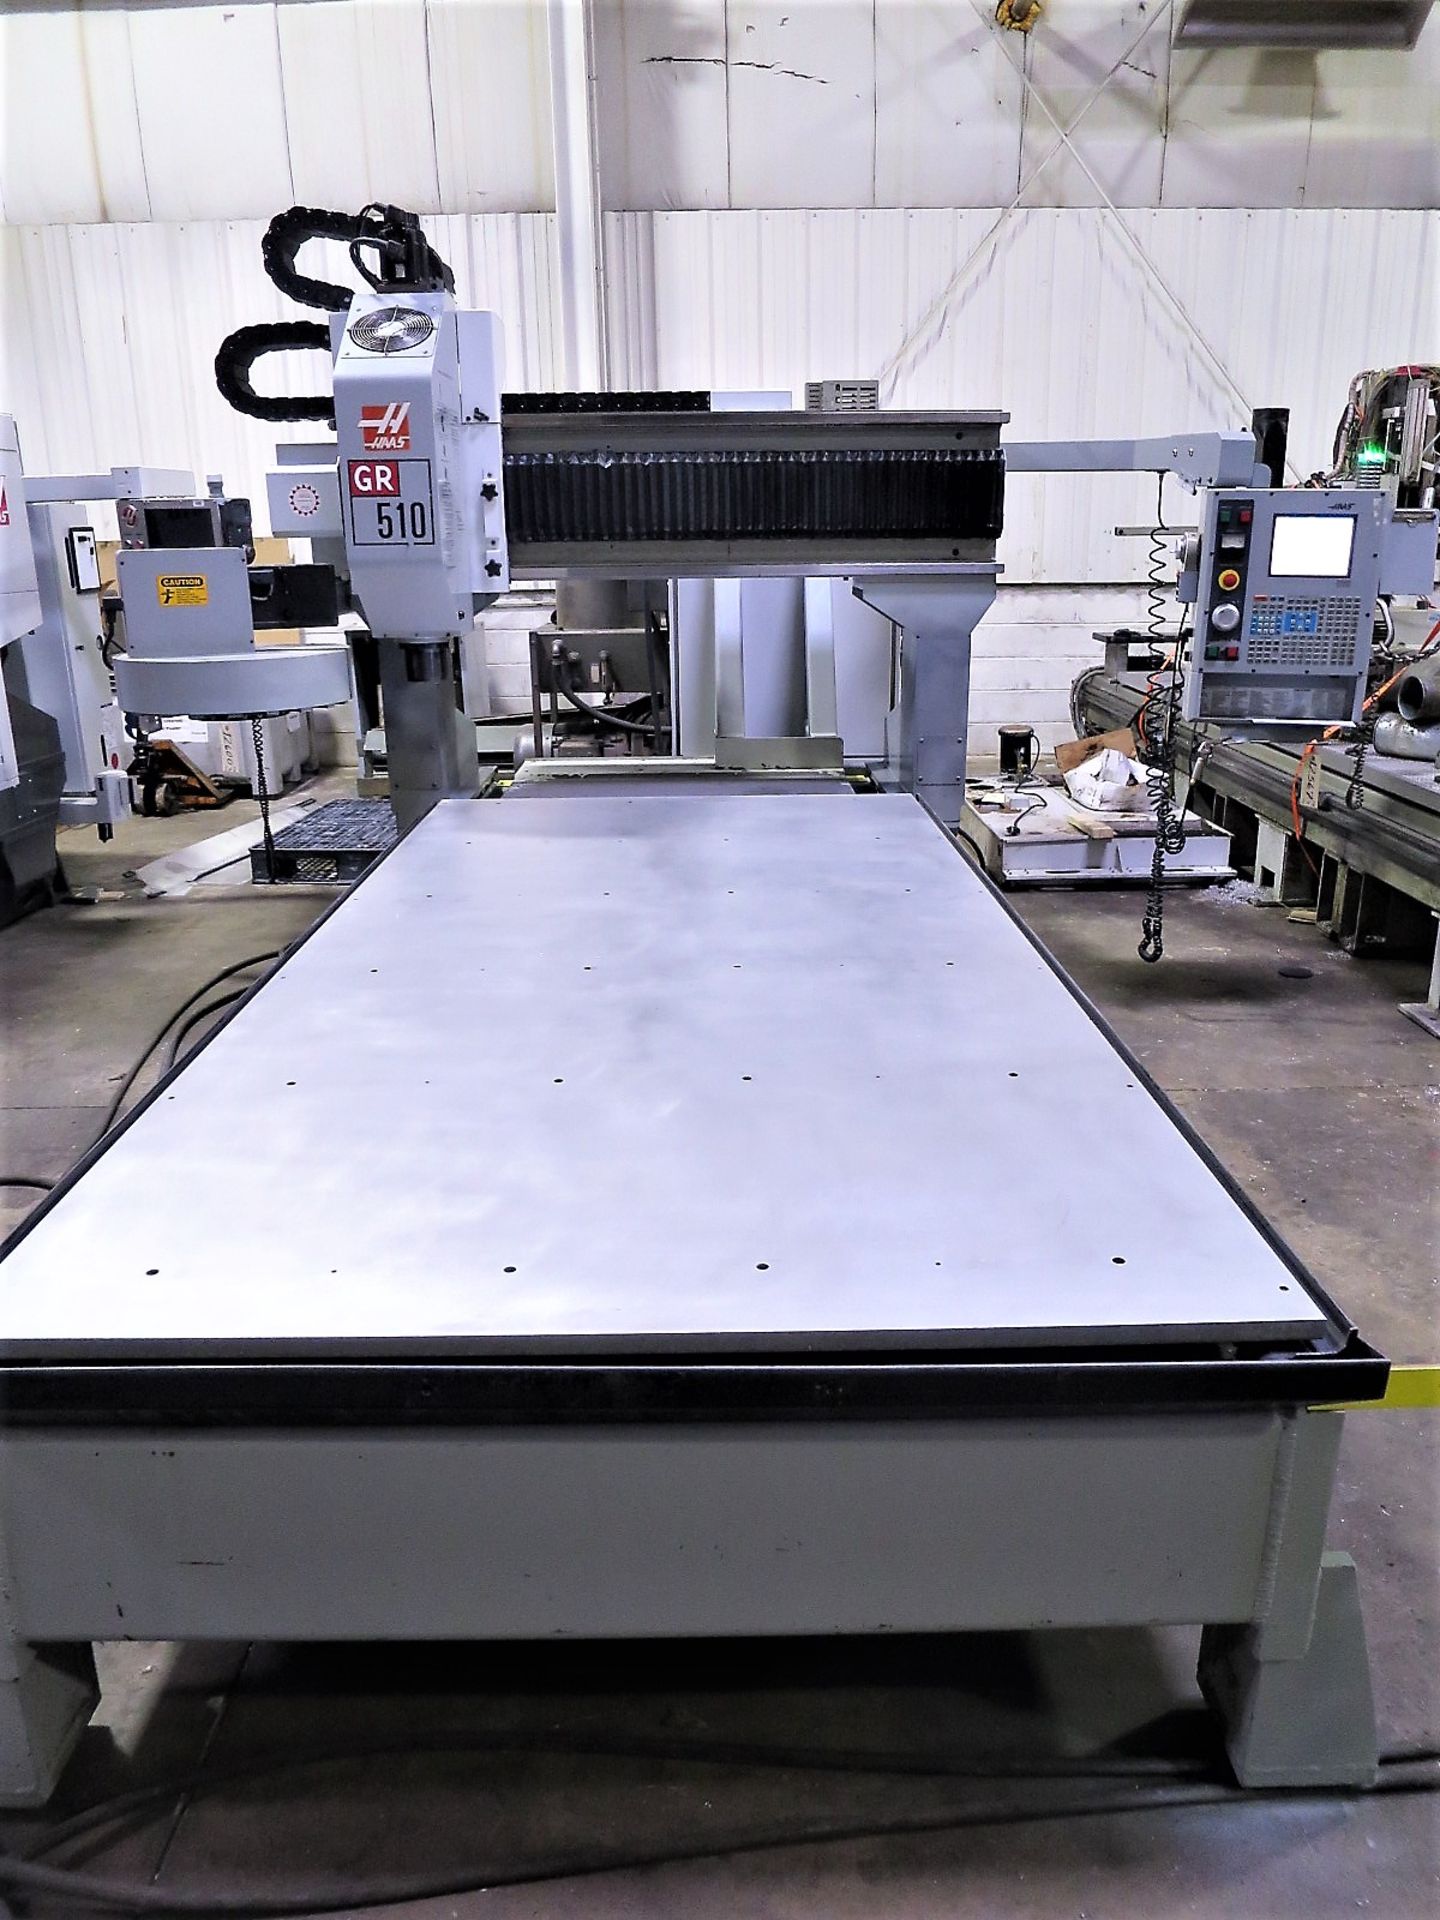 5'x10' Haas Model GR510 3-Axis CNC Router Vertical, S/N 31060, New 2003 - Image 6 of 10